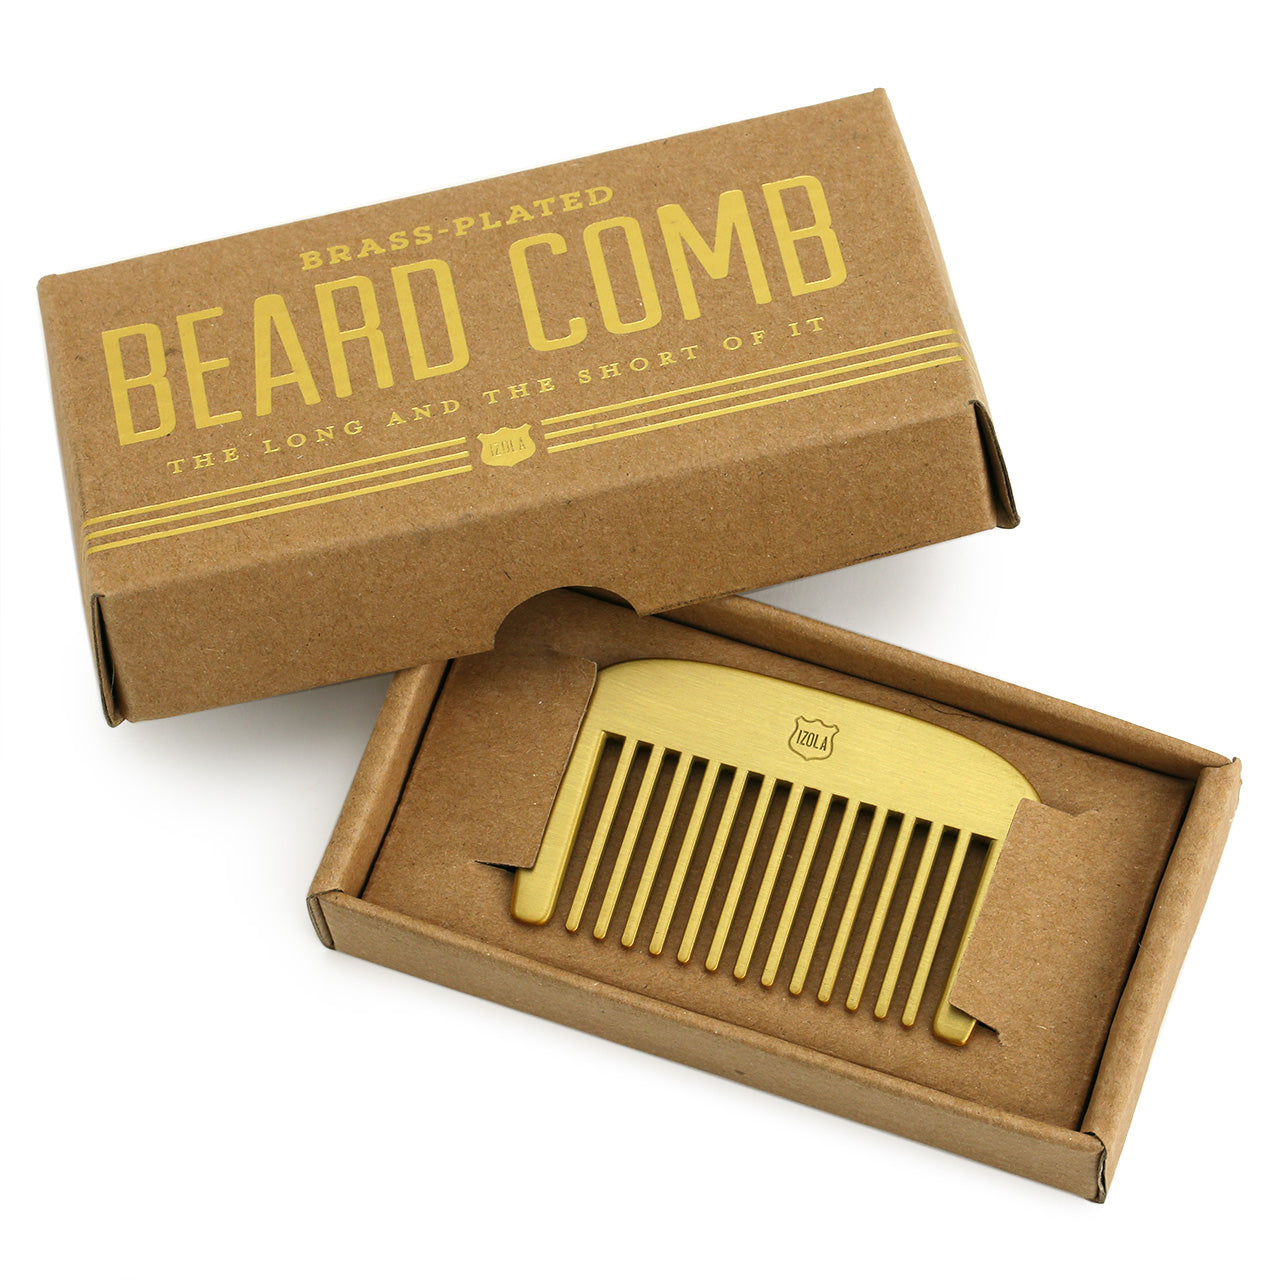 Short brass beard comb engraved with "the long and the short of it"